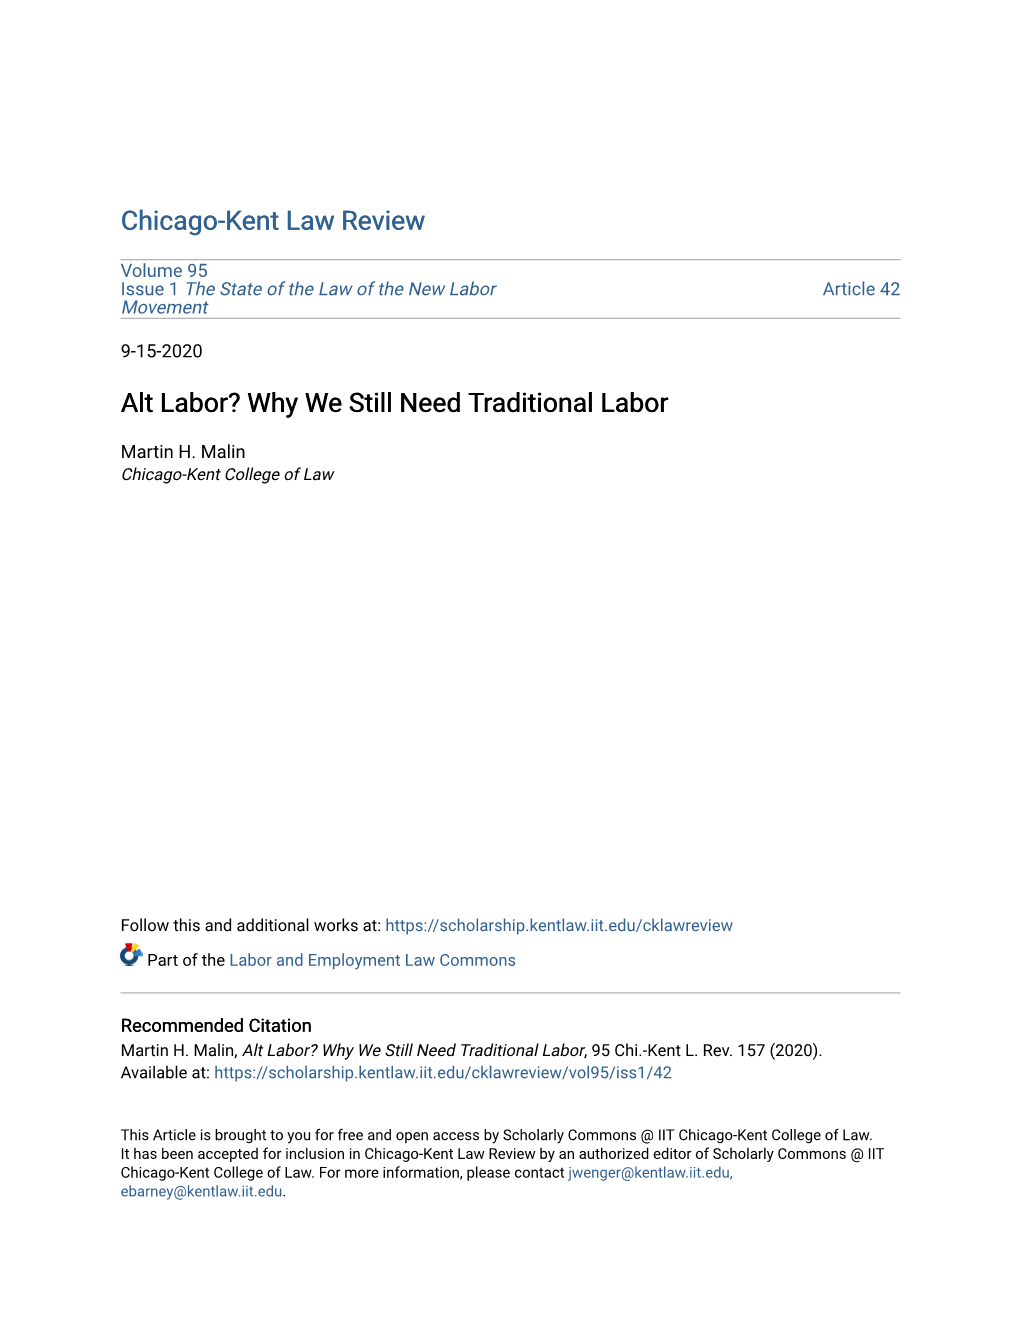 Alt Labor? Why We Still Need Traditional Labor